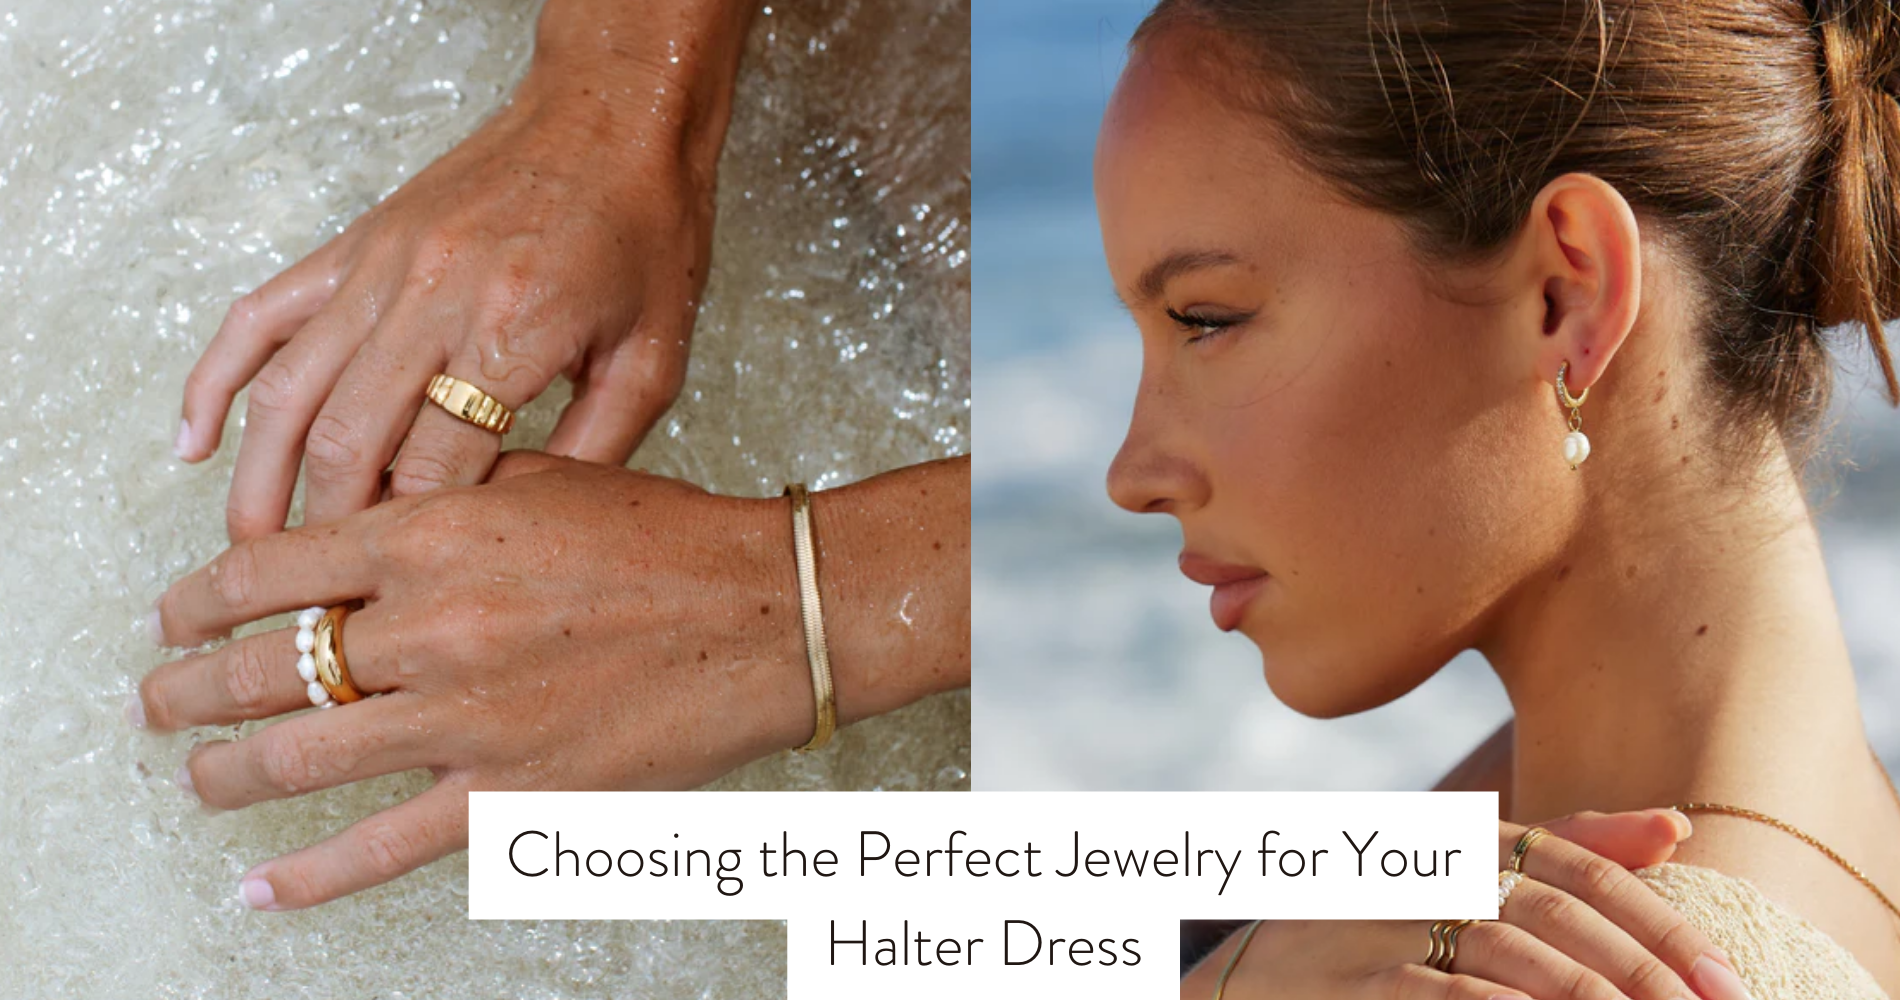 Choosing the Perfect Jewelry for Your Halter Dress